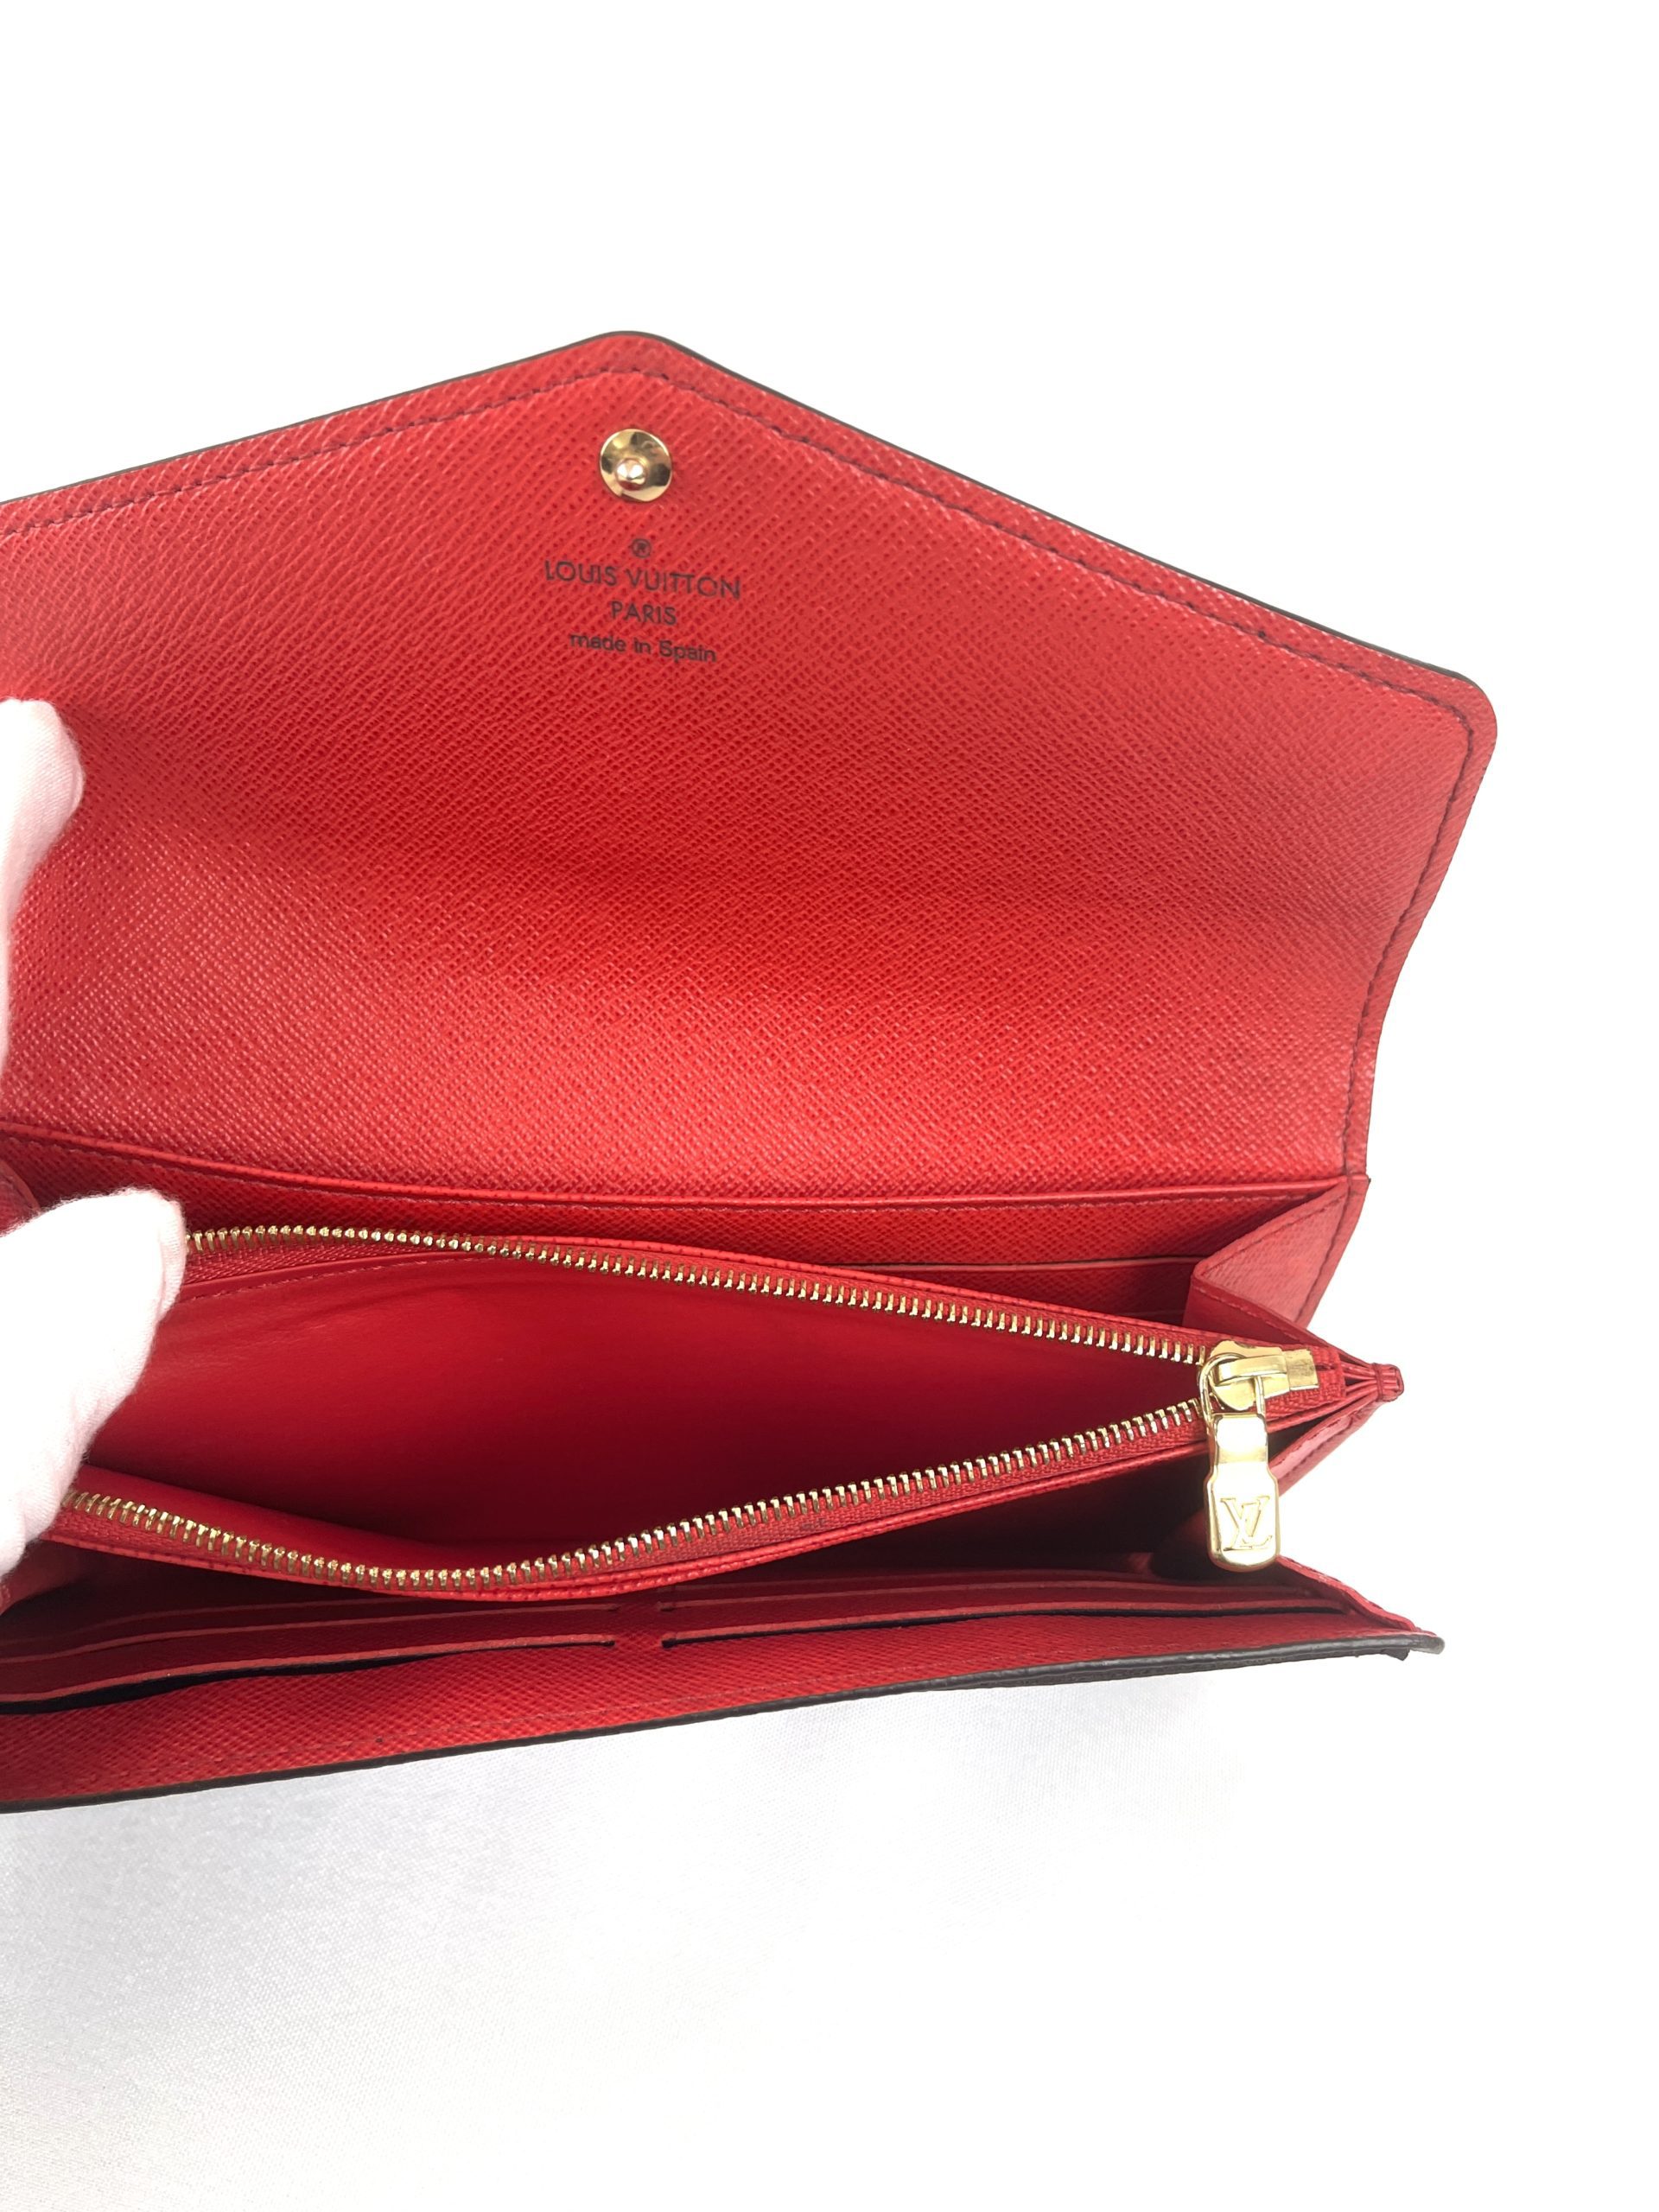 Louis Vuitton - Authenticated Sarah Wallet - Patent Leather Red Plain for Women, Very Good Condition